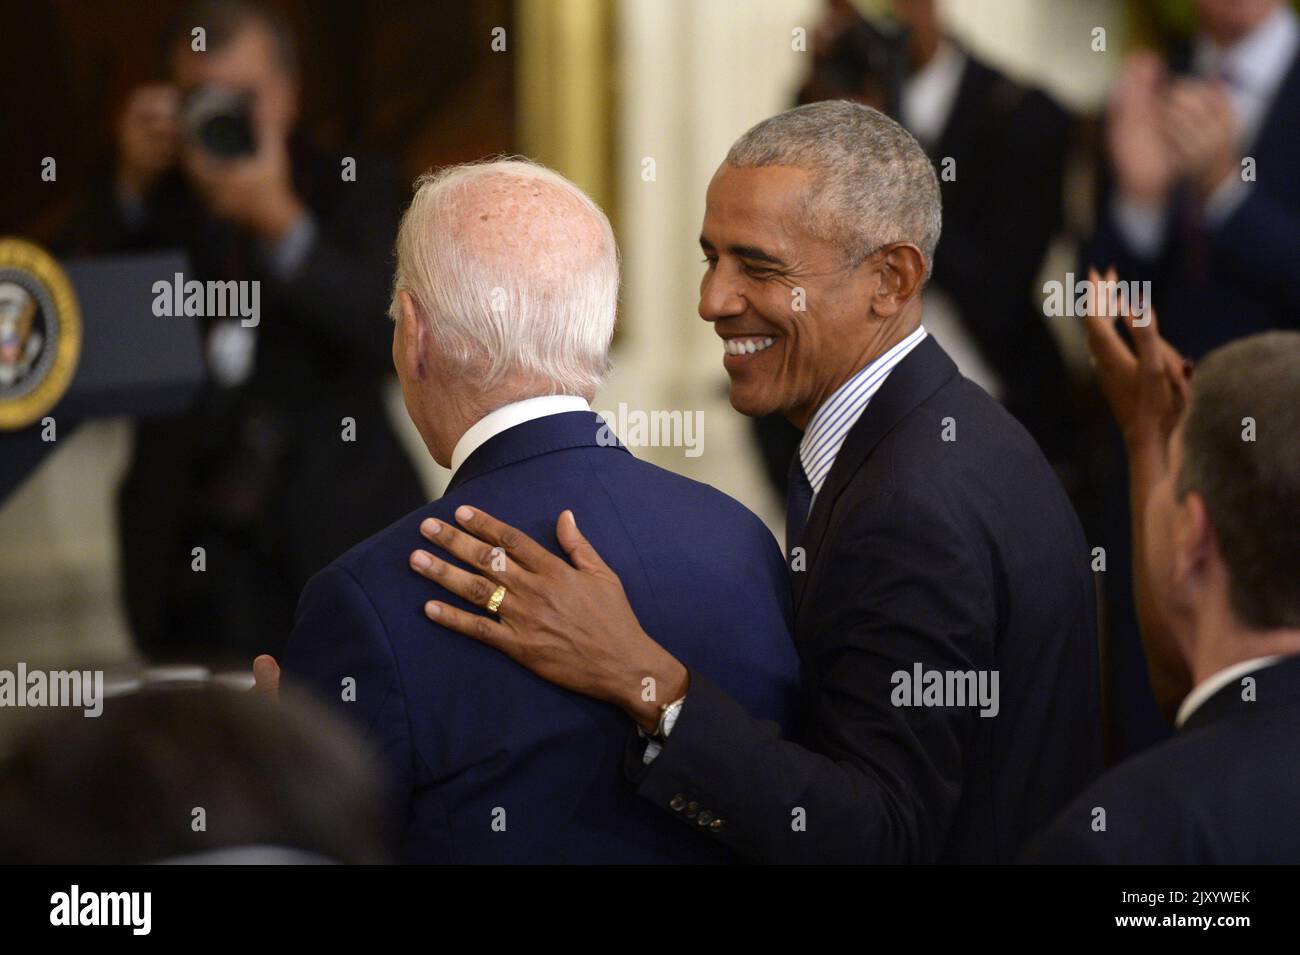 Washington, United States. 07th Sep, 2022. Former President Barack Obama (R) and President Joe Biden smile during a ceremony after the Obama's unveiled their official portraits in the East Room of the White House in Washington, DC on Wednesday, September 7, 2022. Photo by Bonnie Cash/UPI Credit: UPI/Alamy Live News Stock Photo